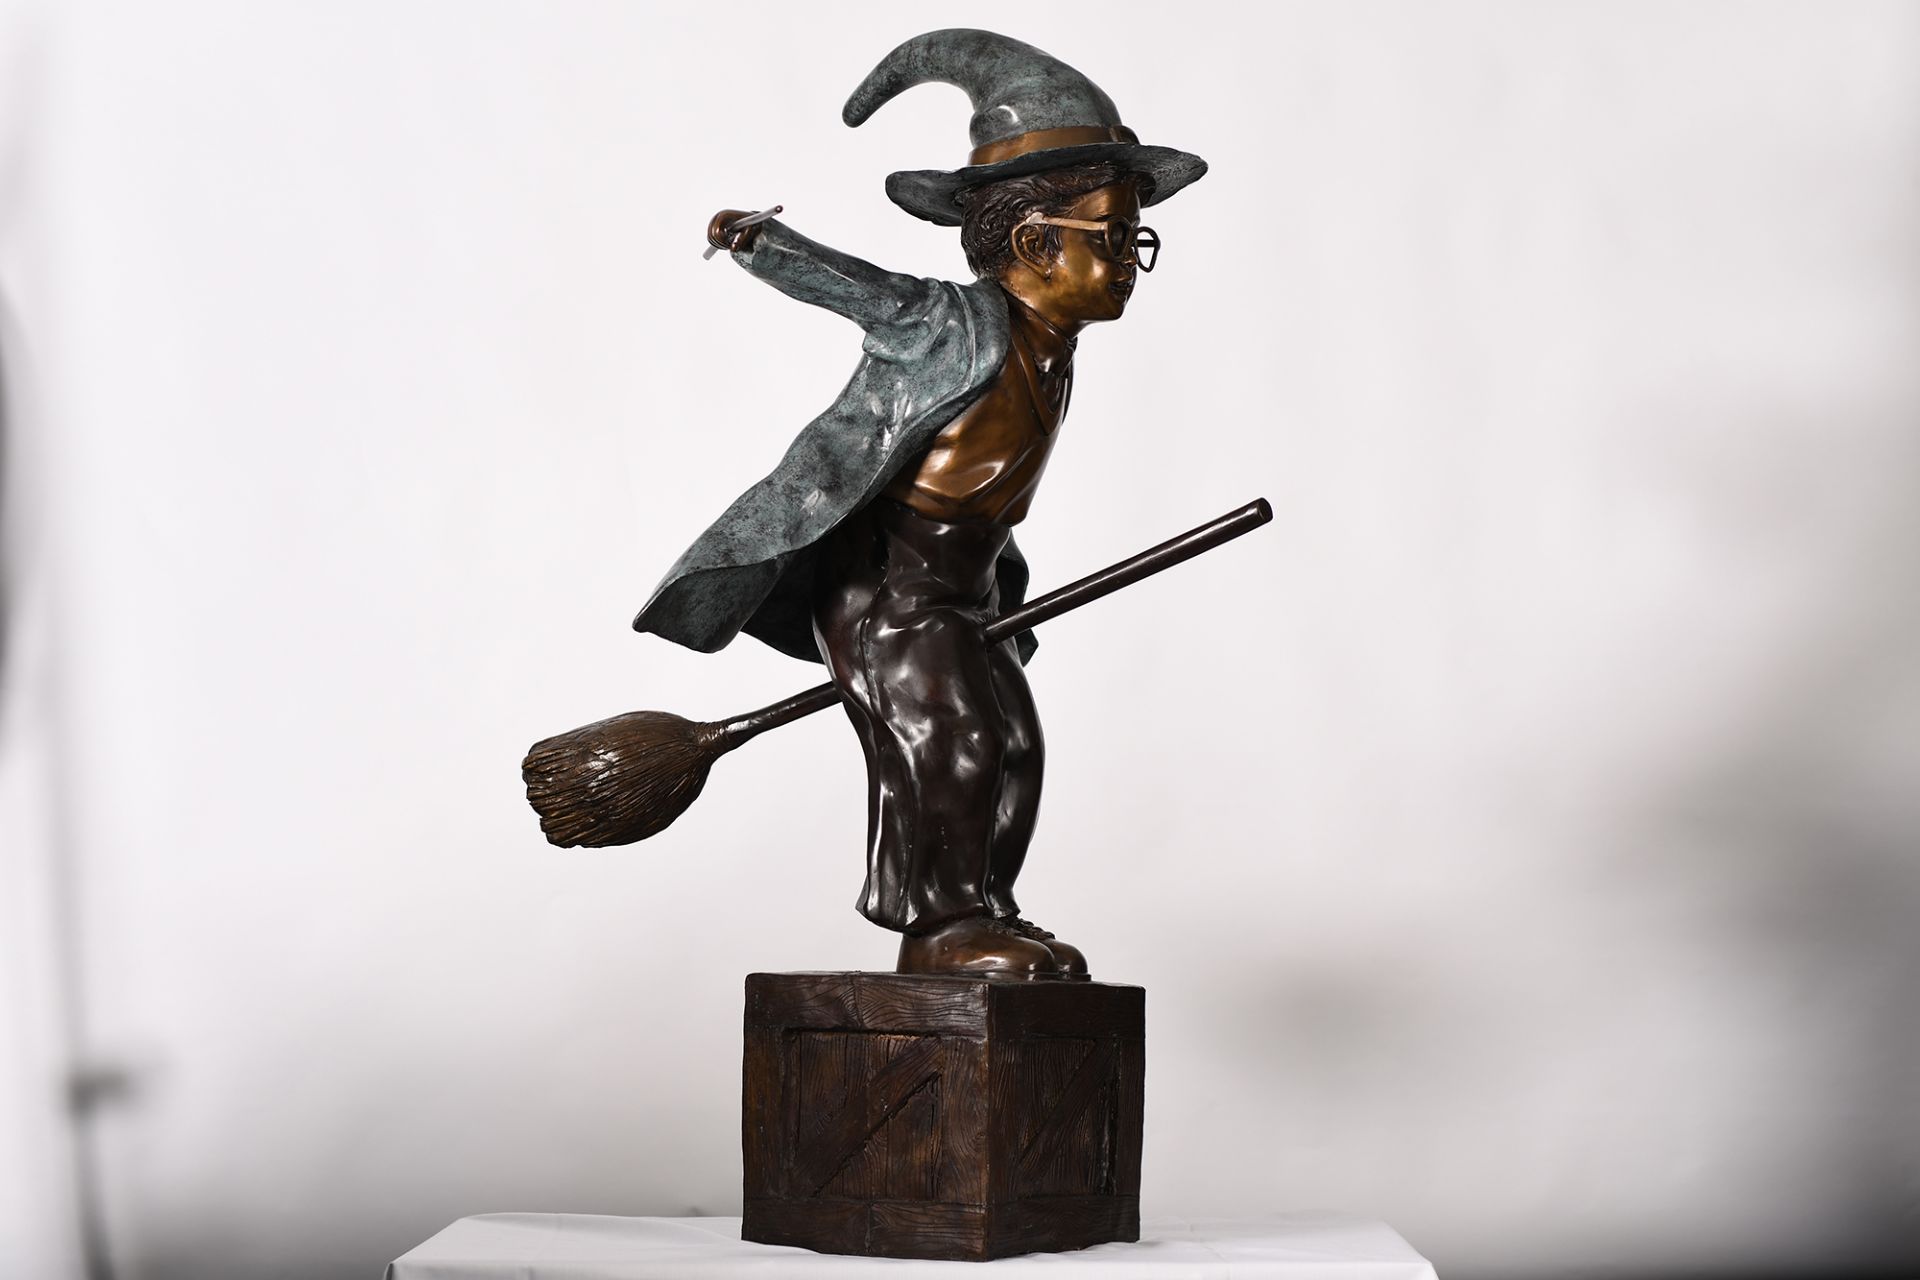 Large 4ft Bronze Wizard Figure - Image 2 of 10